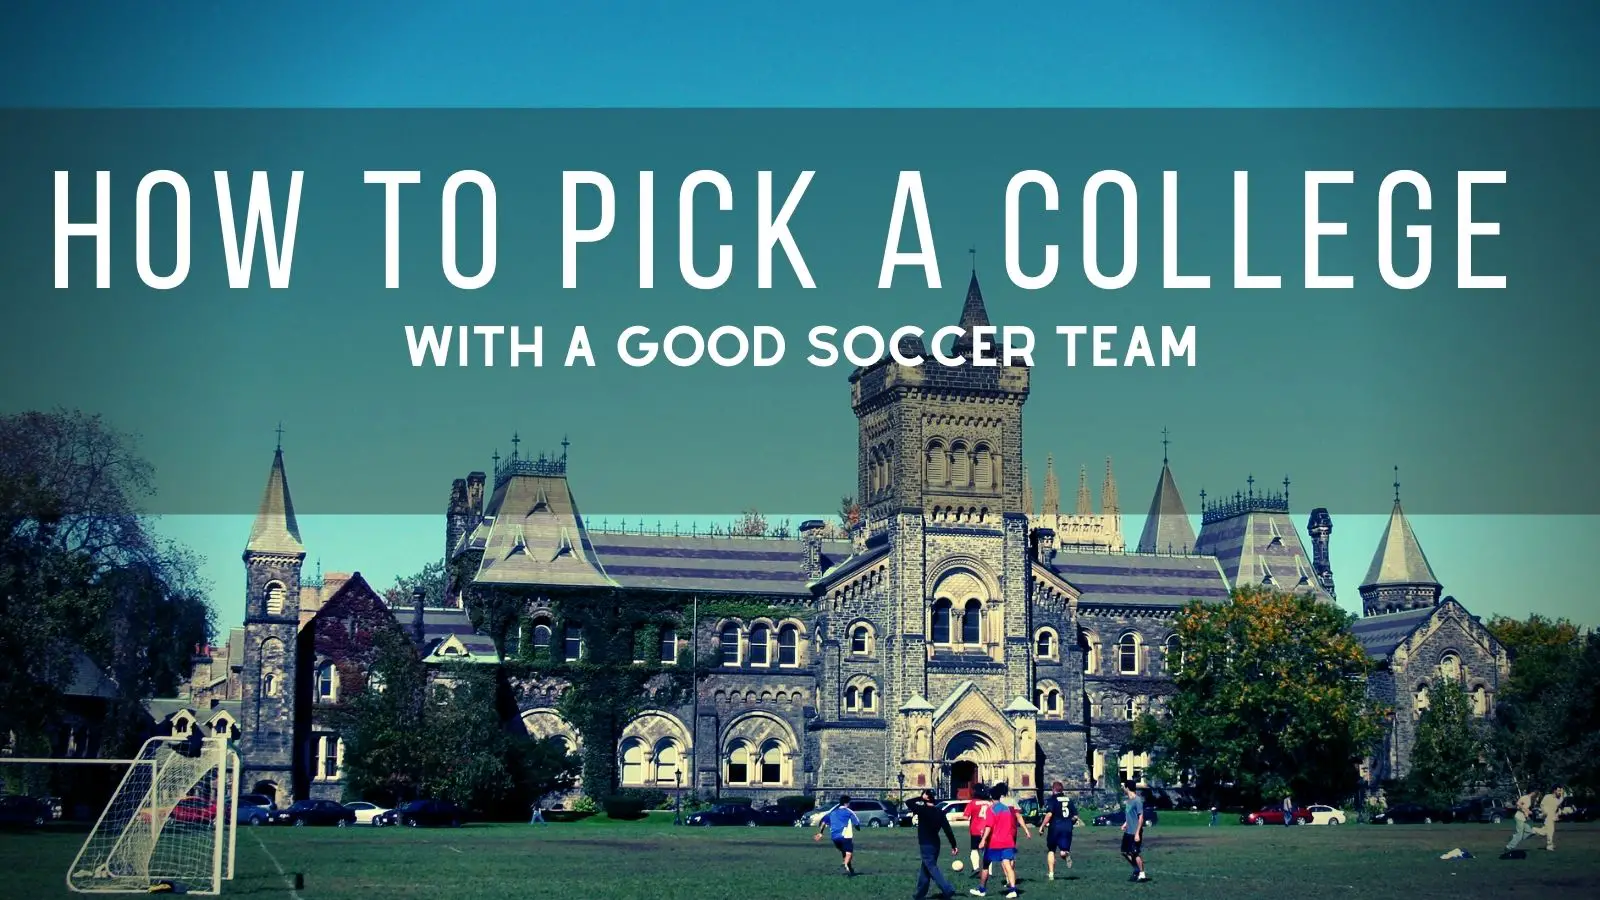 How to Pick a College with Good Soccer Teams: A Guide to College Soccer Recruitment